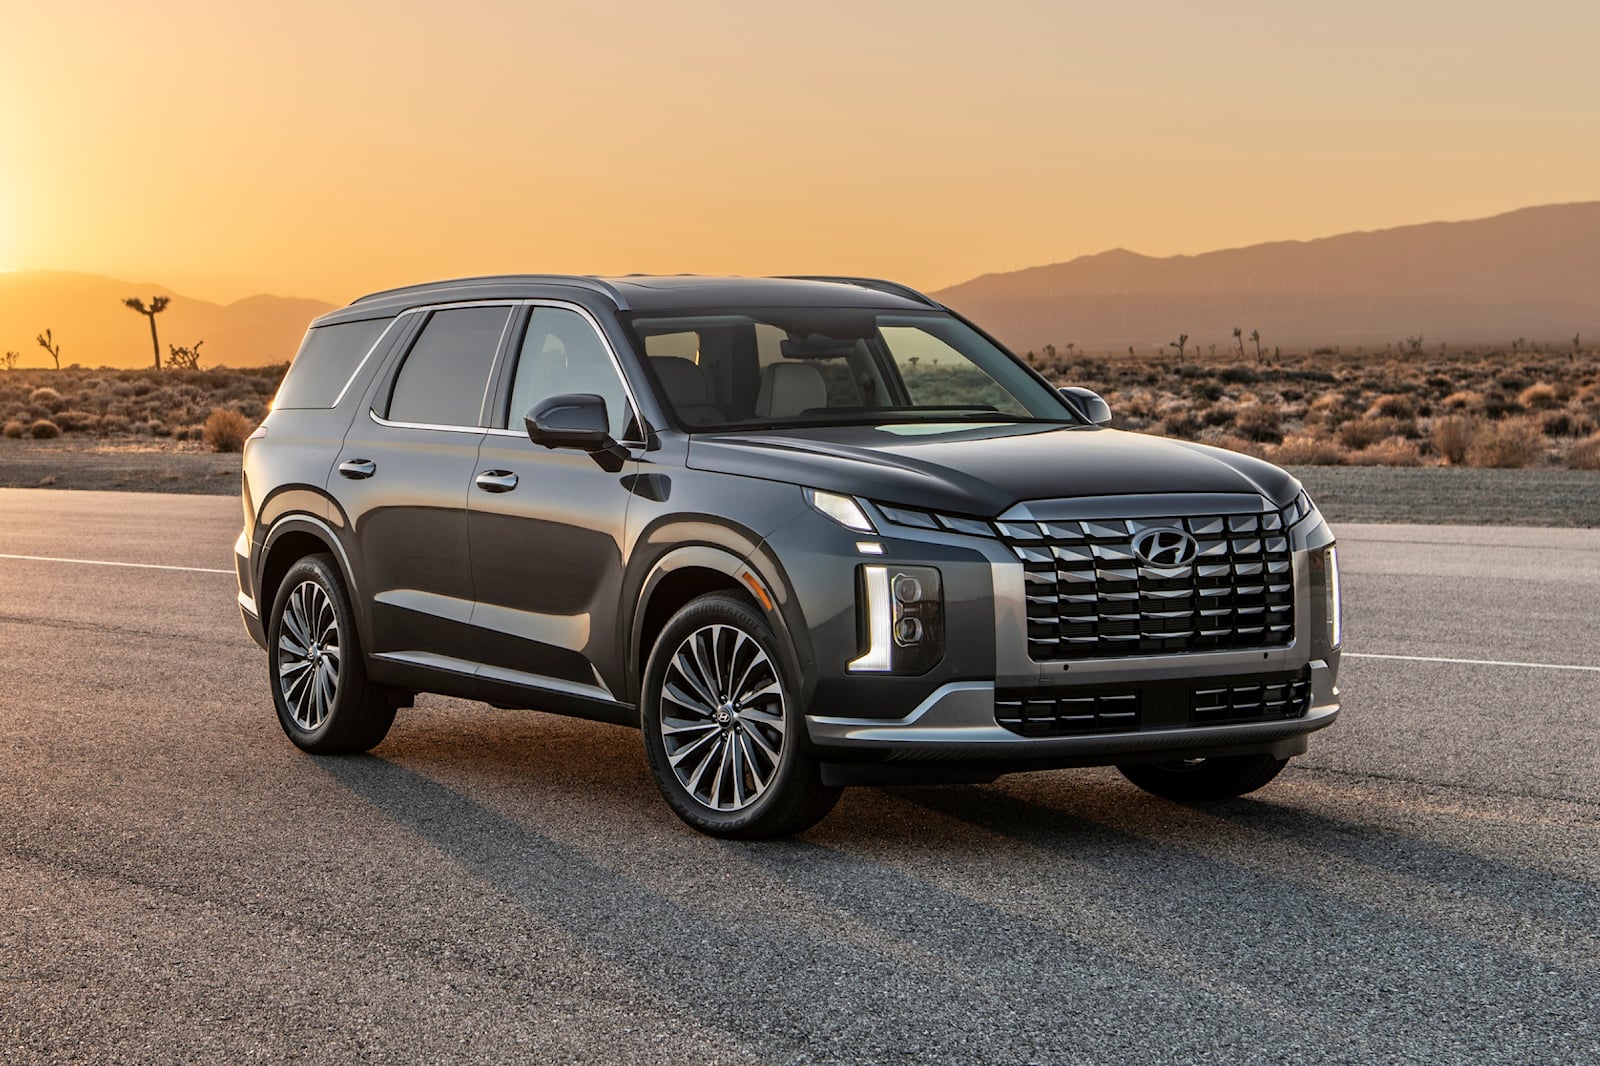 Hyundai Palisade XRT for sale Used Palisade XRT near you in the US